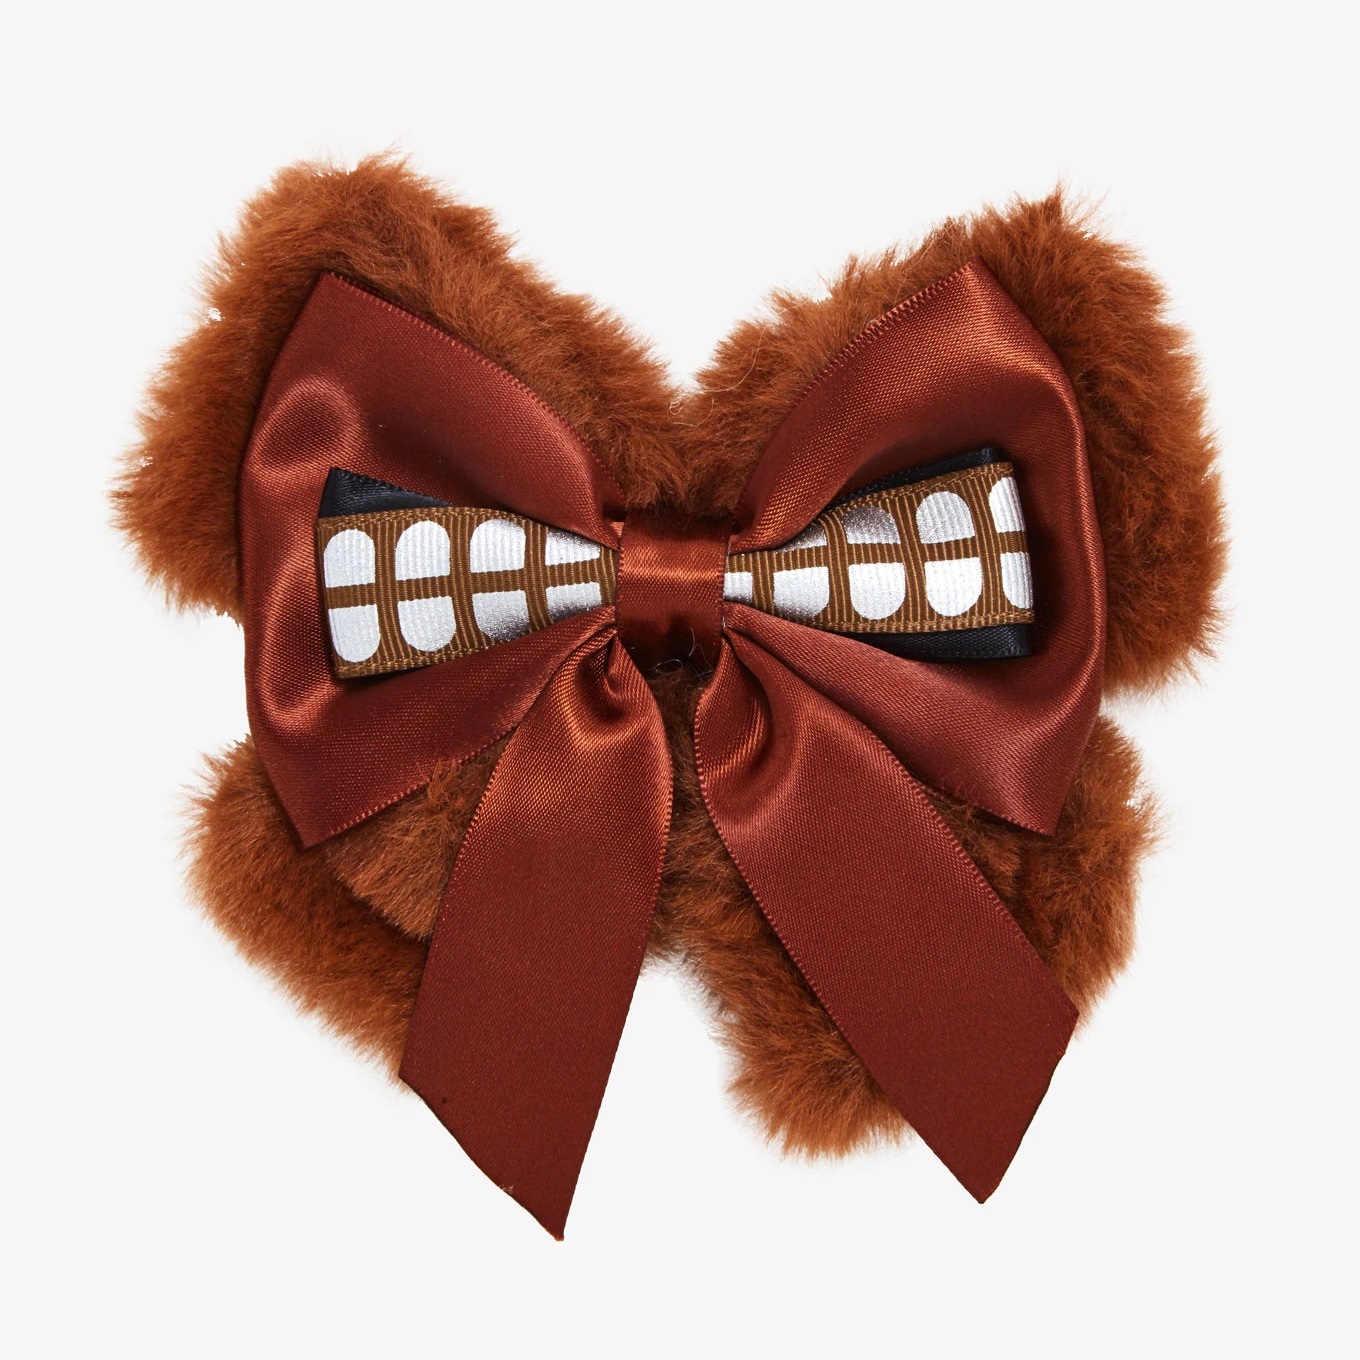 Star Wars Chewbacca Fuzzy Faux Fur Cosplay Style Hair Bow at Hot Topic